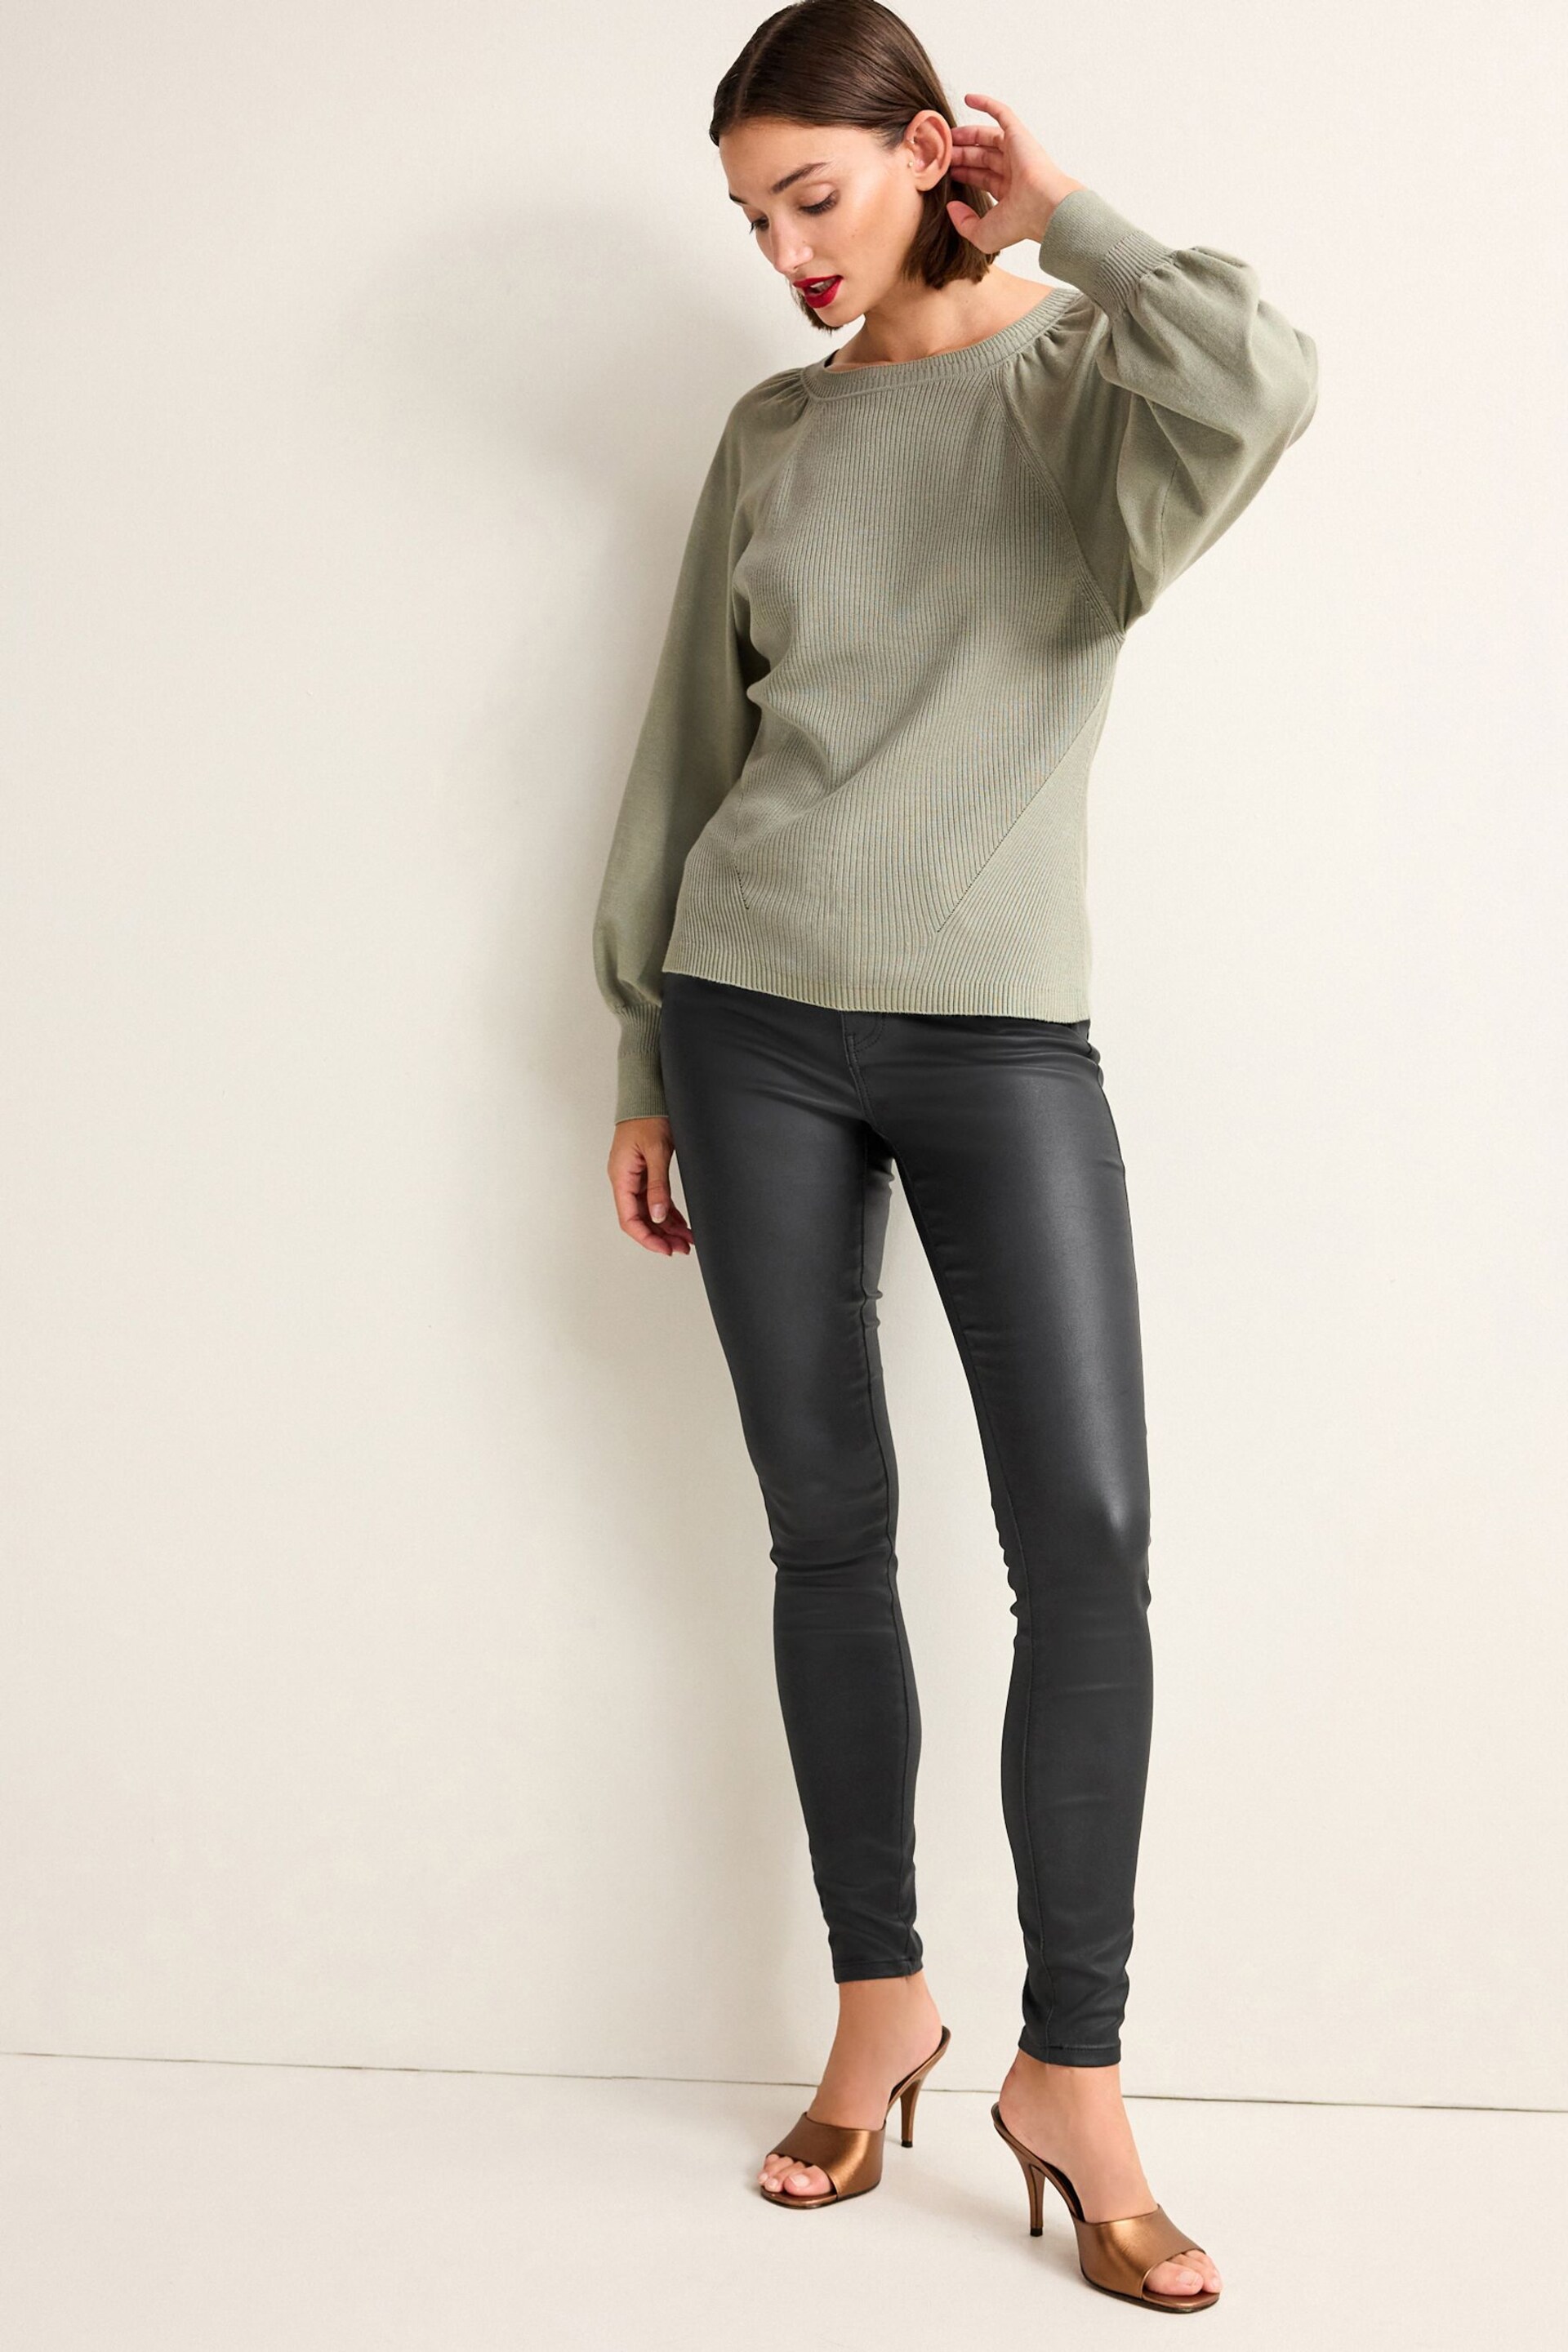 Sage Green Puff Sleeve Jumper - Image 2 of 6